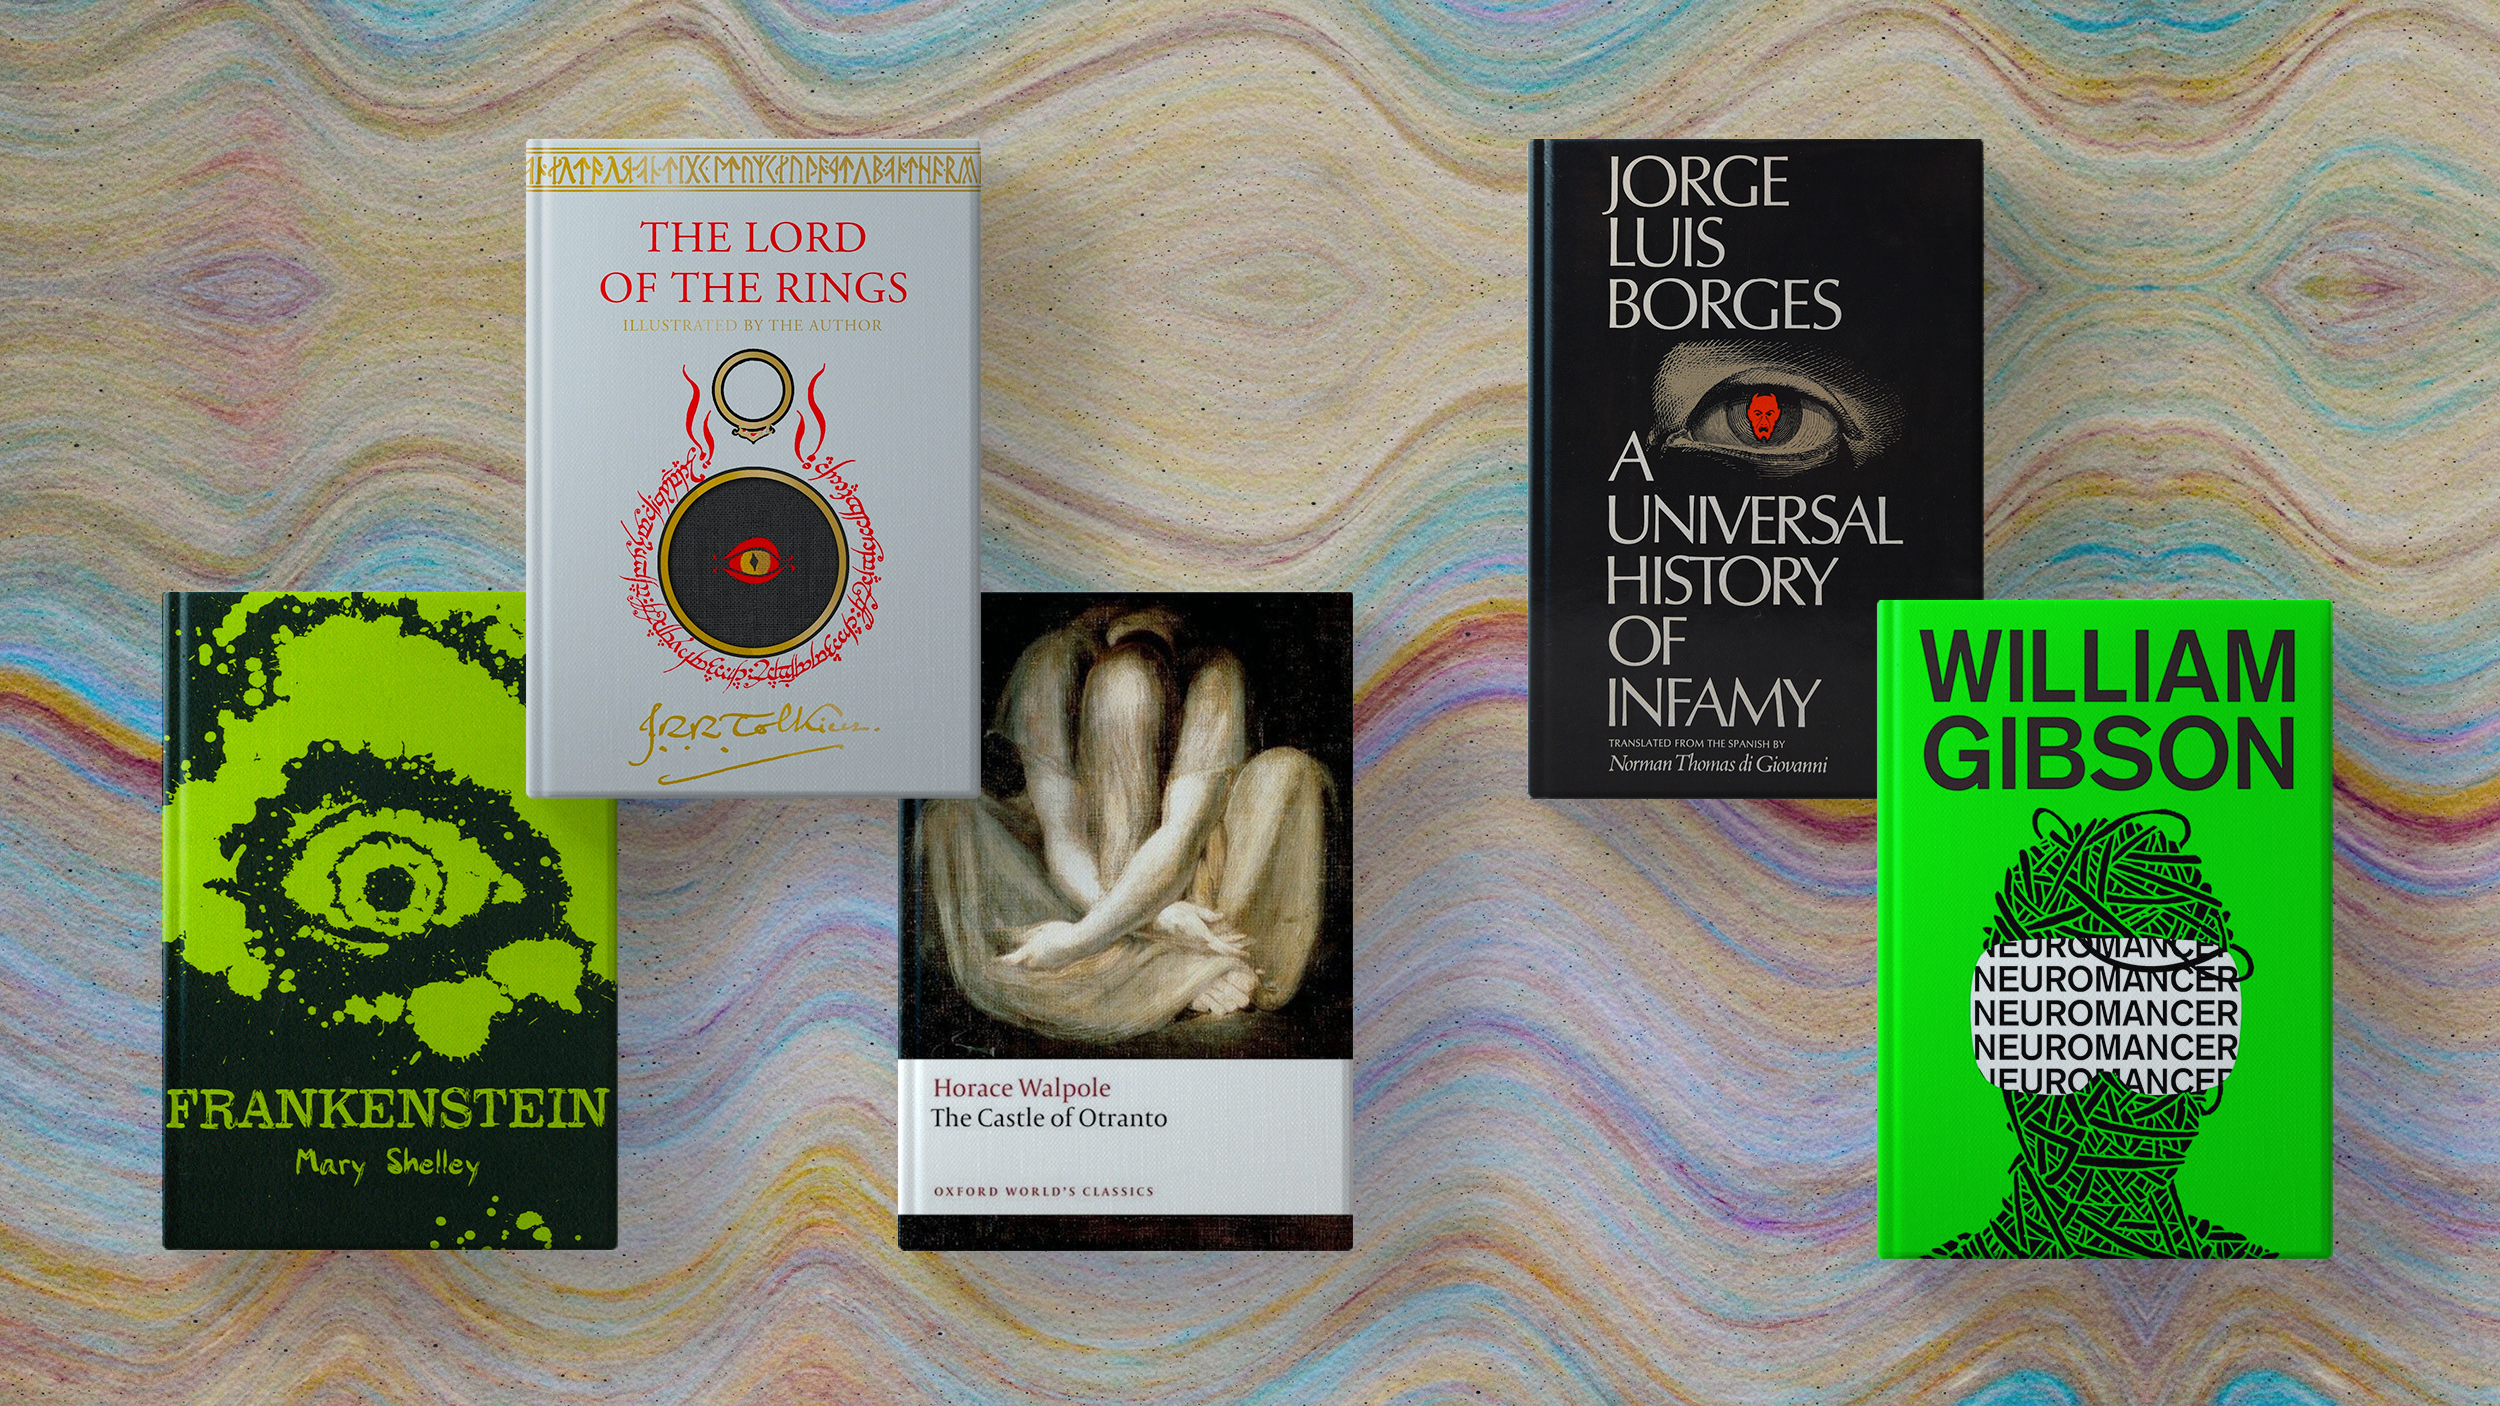 Five new book covers of various genres on a colorful background.